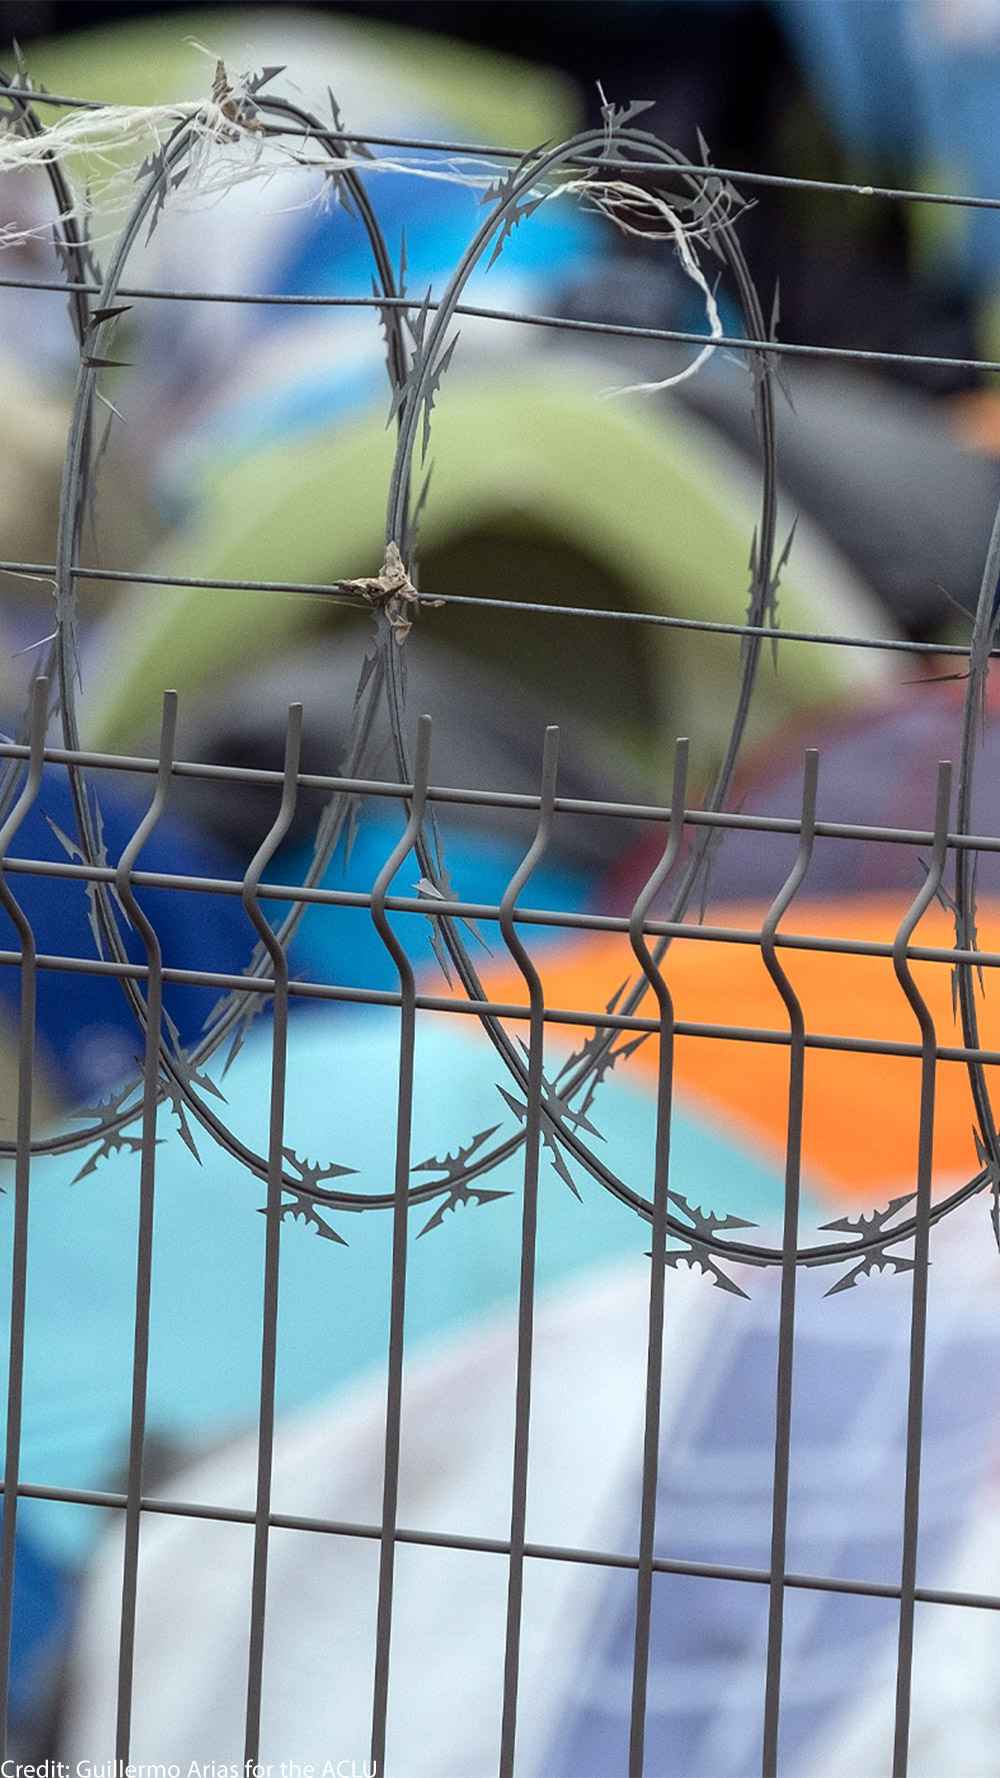 Barbed wire fence at a refugee camp for migrants and asylum seekers in Matamoros, Mexico, October 2019. Guillermo Arias for the ACLU.